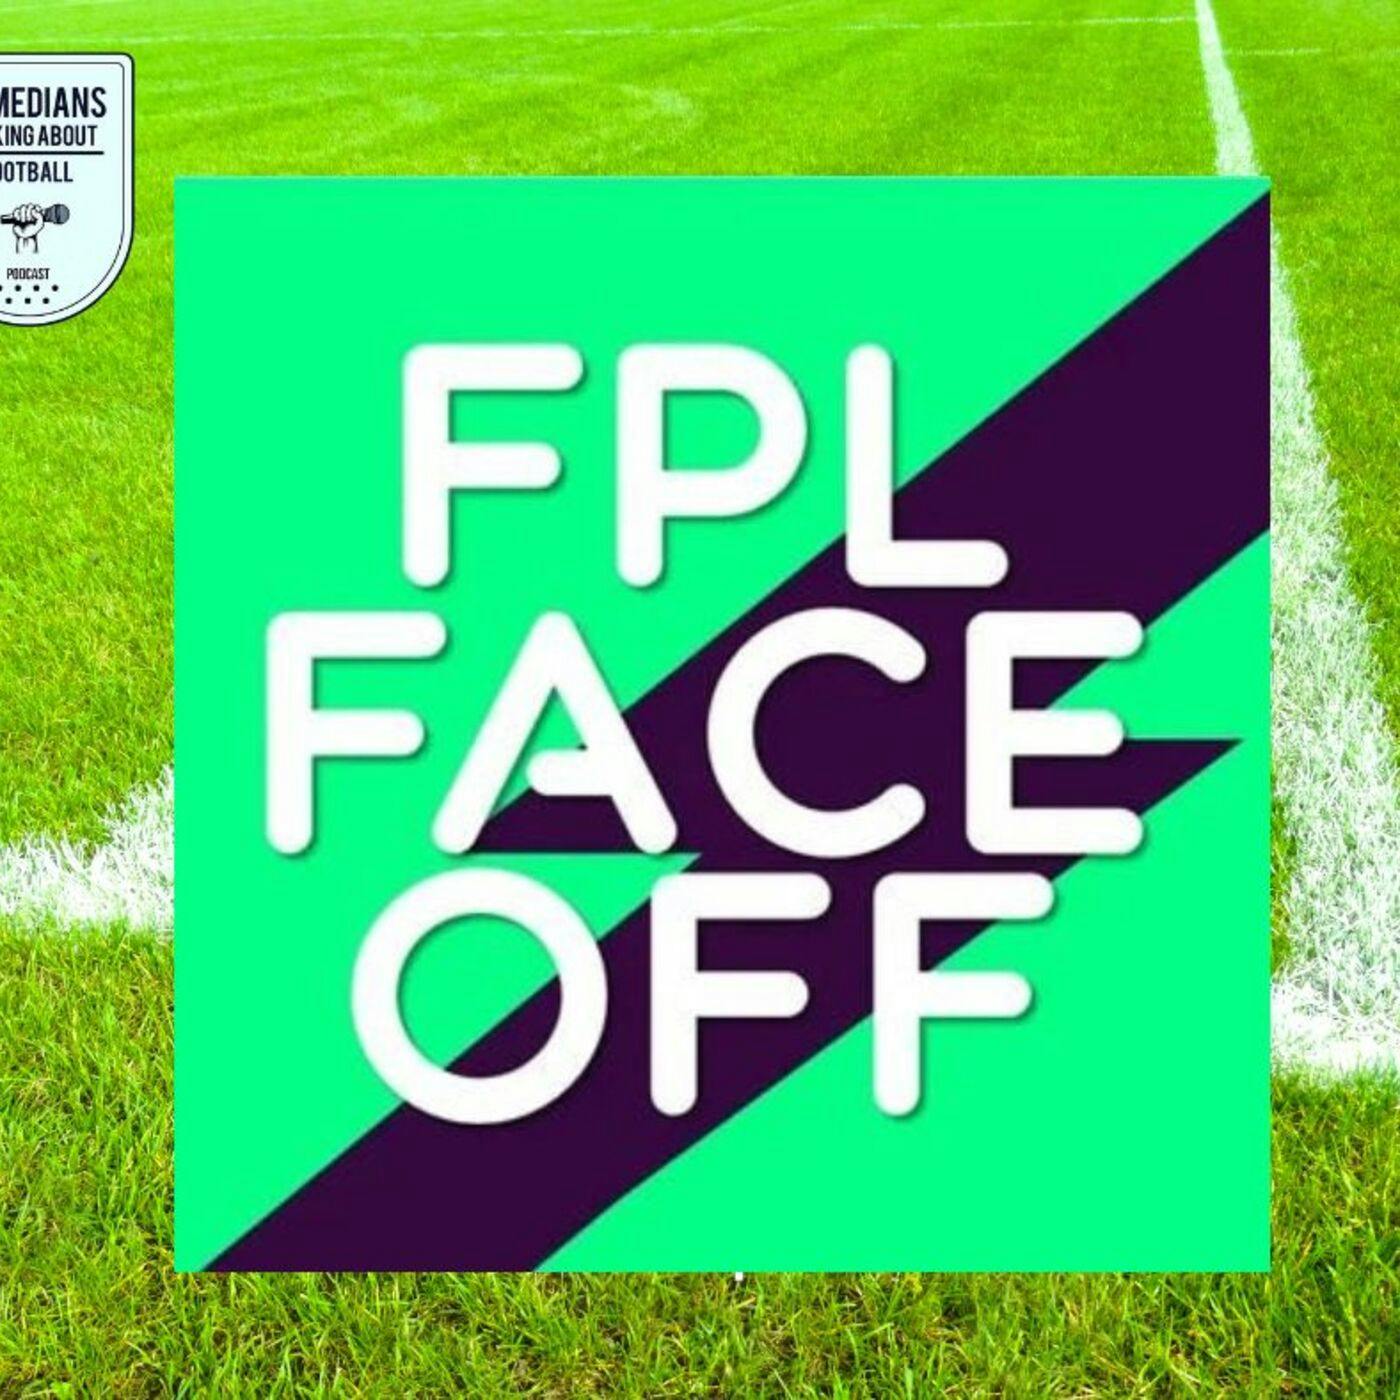 Tom Glover and Dan Fitzhenry (FPL Face Off Podcast) on Fantasy Premier League Football